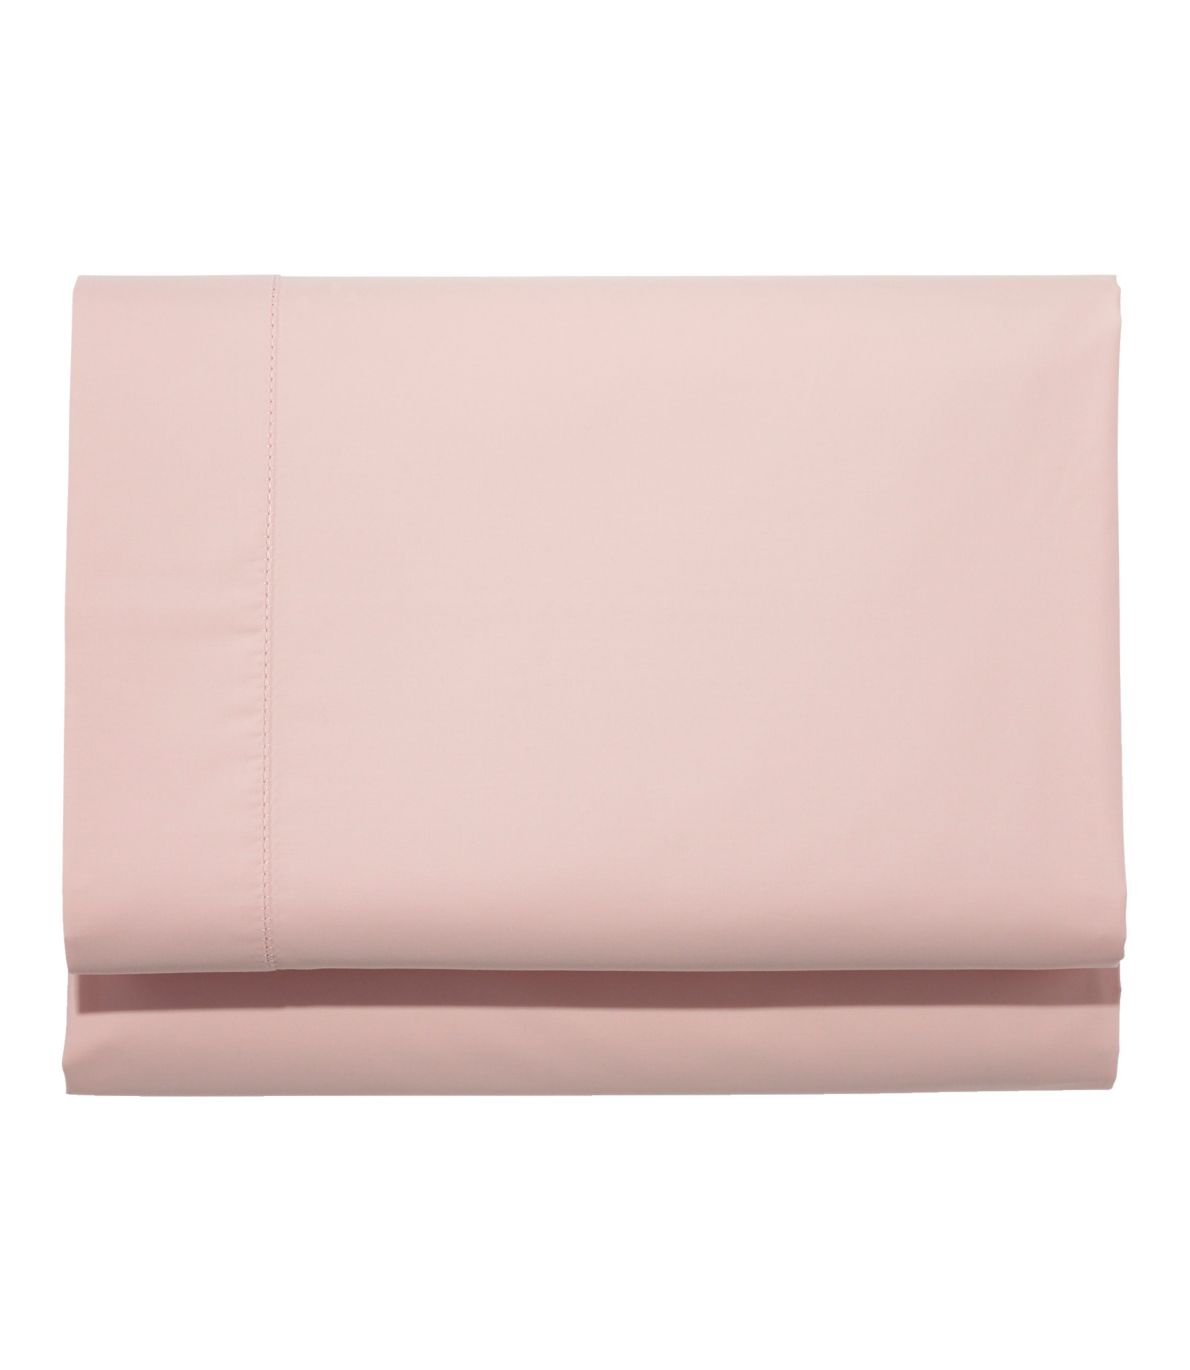 280-Thread-Count Pima Cotton Percale Sheet, Fitted